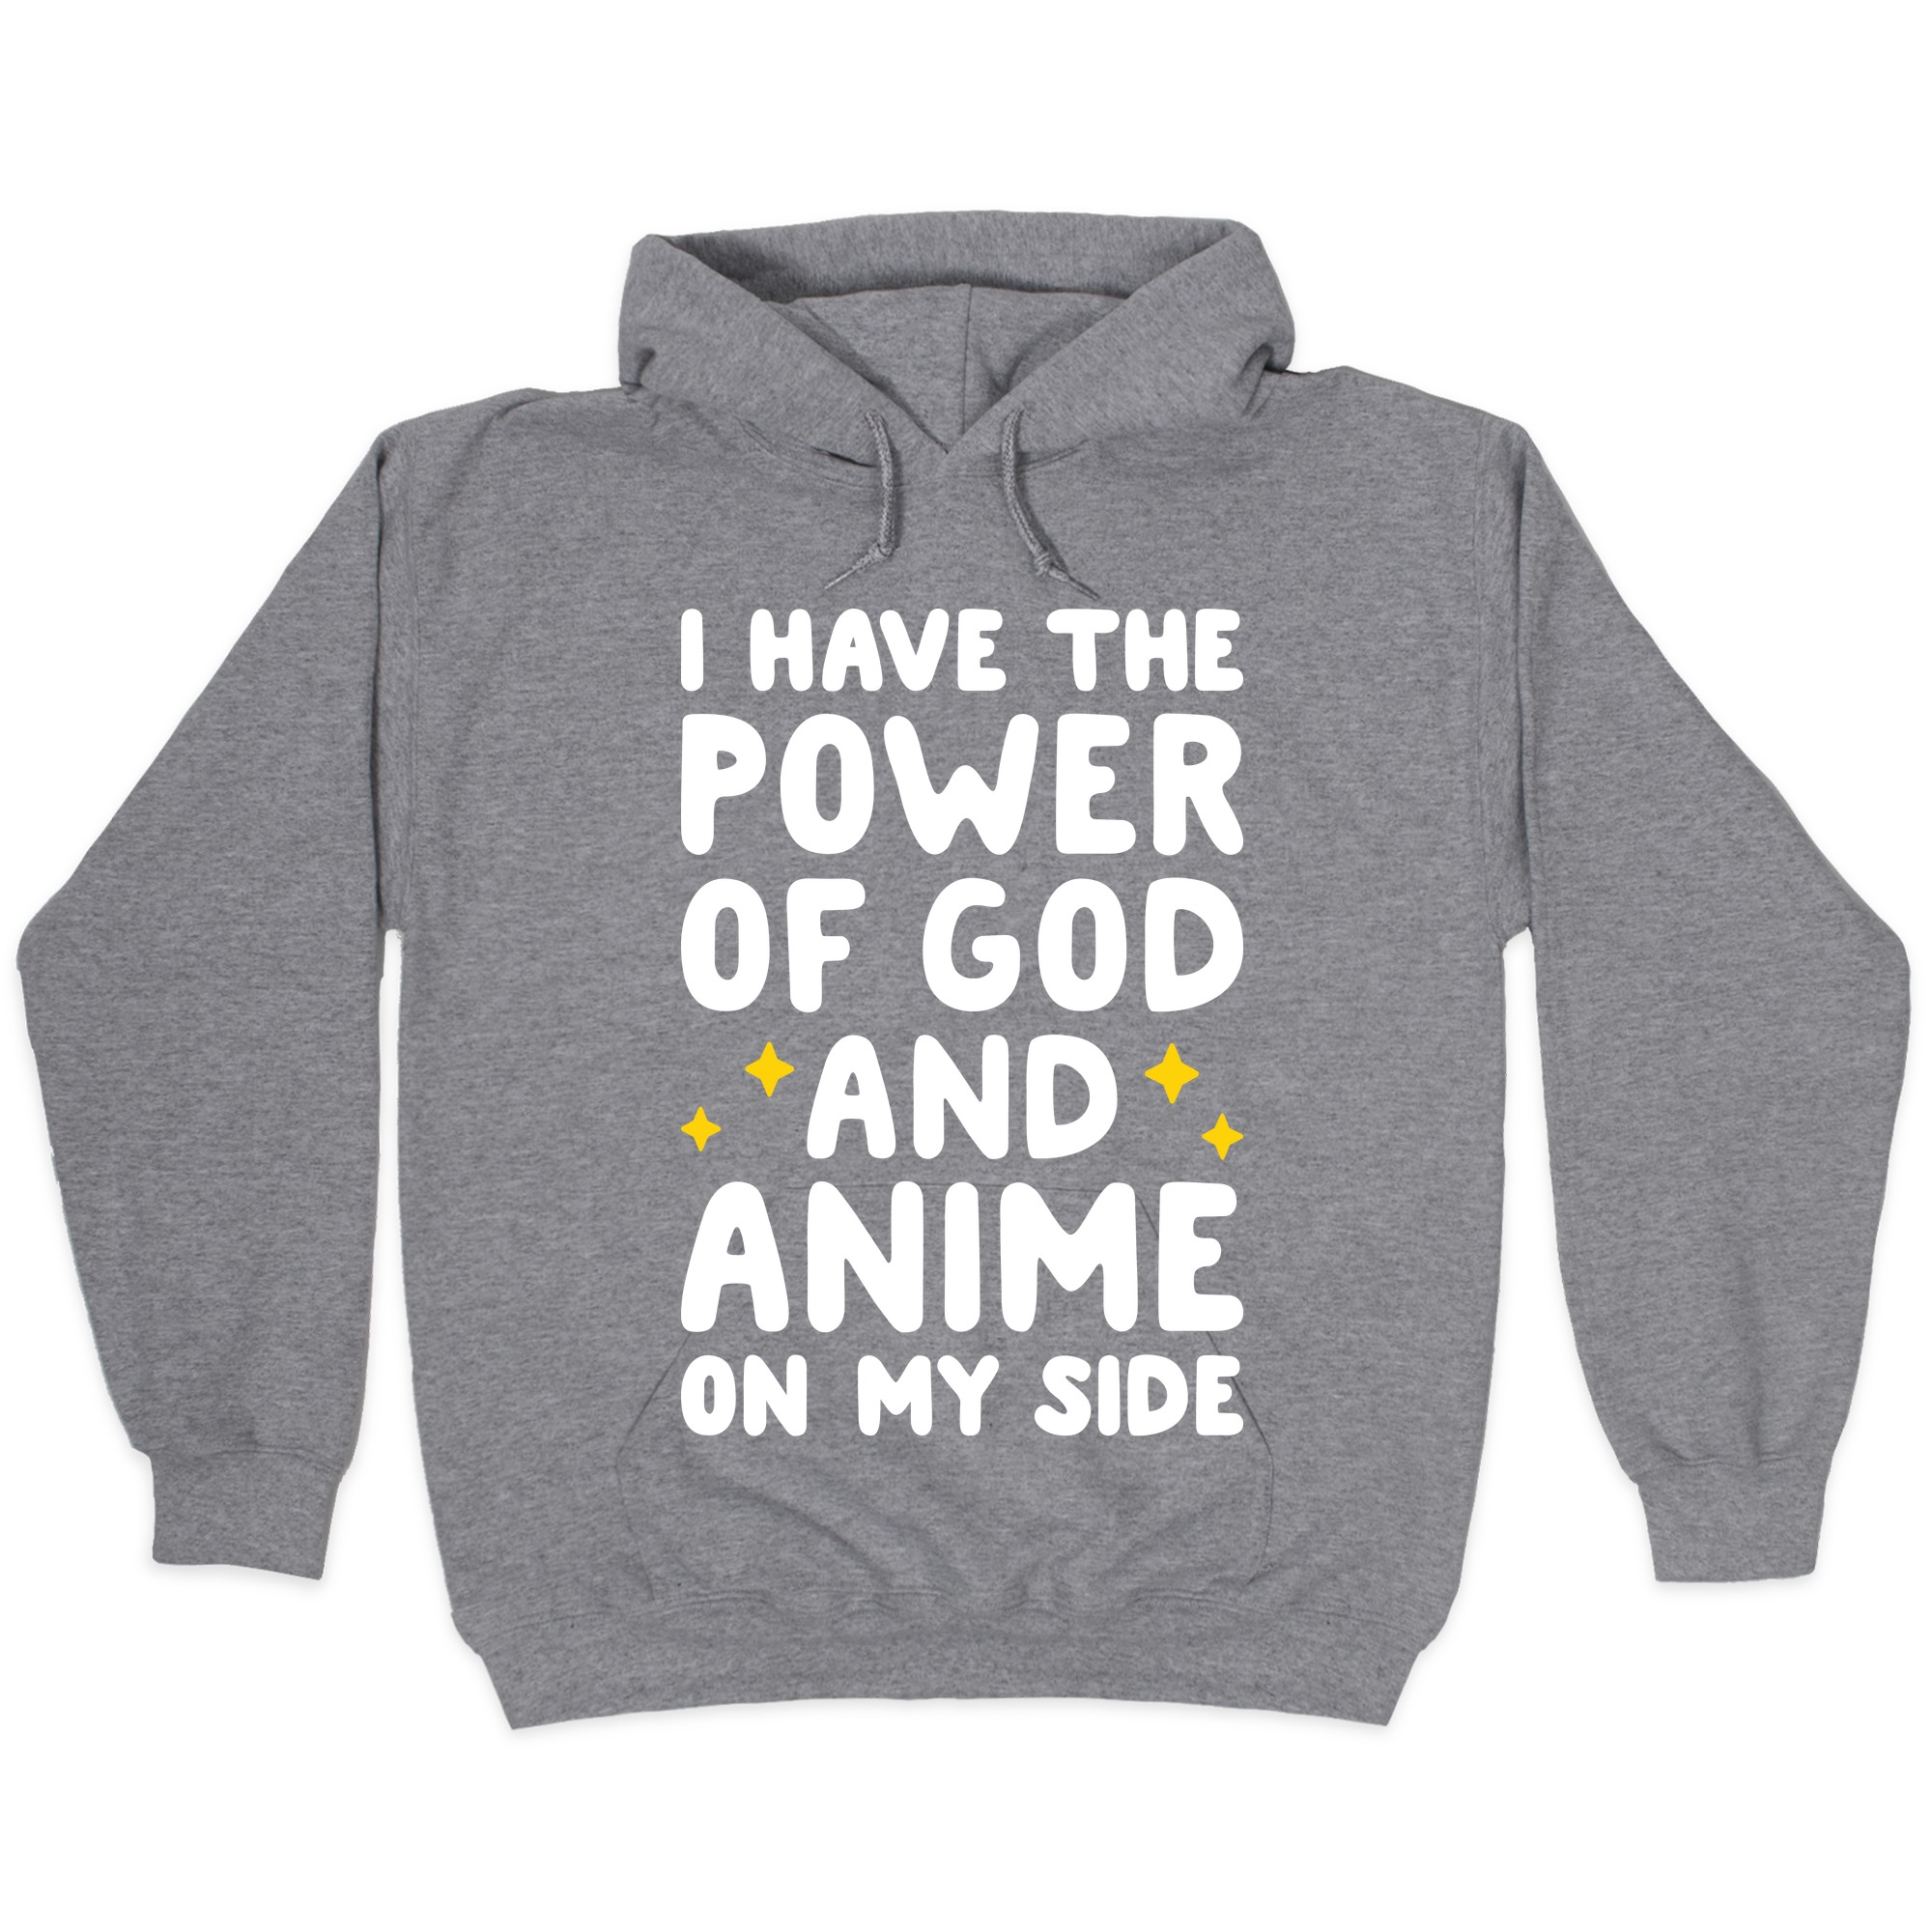 I Have The Power Of God And Anime On My Side Hooded Sweatshirts Lookhuman #timeforpayback 😈 i wanted to do so much more to this but i need to go to bed lol. i have the power of god and anime on my side hooded sweatshirts lookhuman